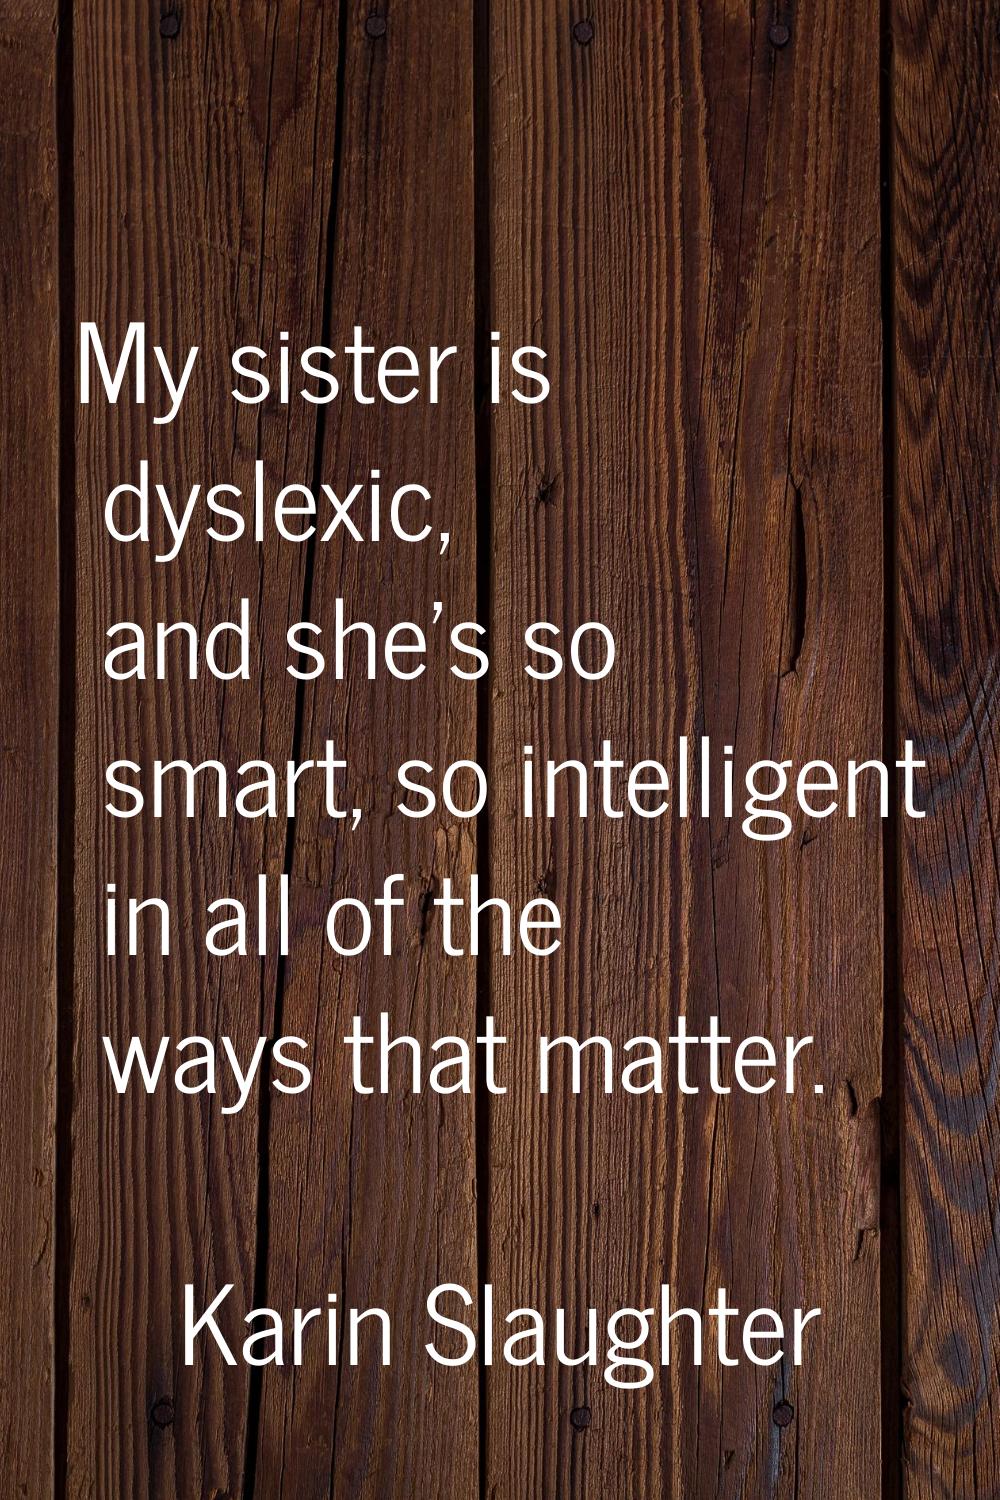 My sister is dyslexic, and she's so smart, so intelligent in all of the ways that matter.